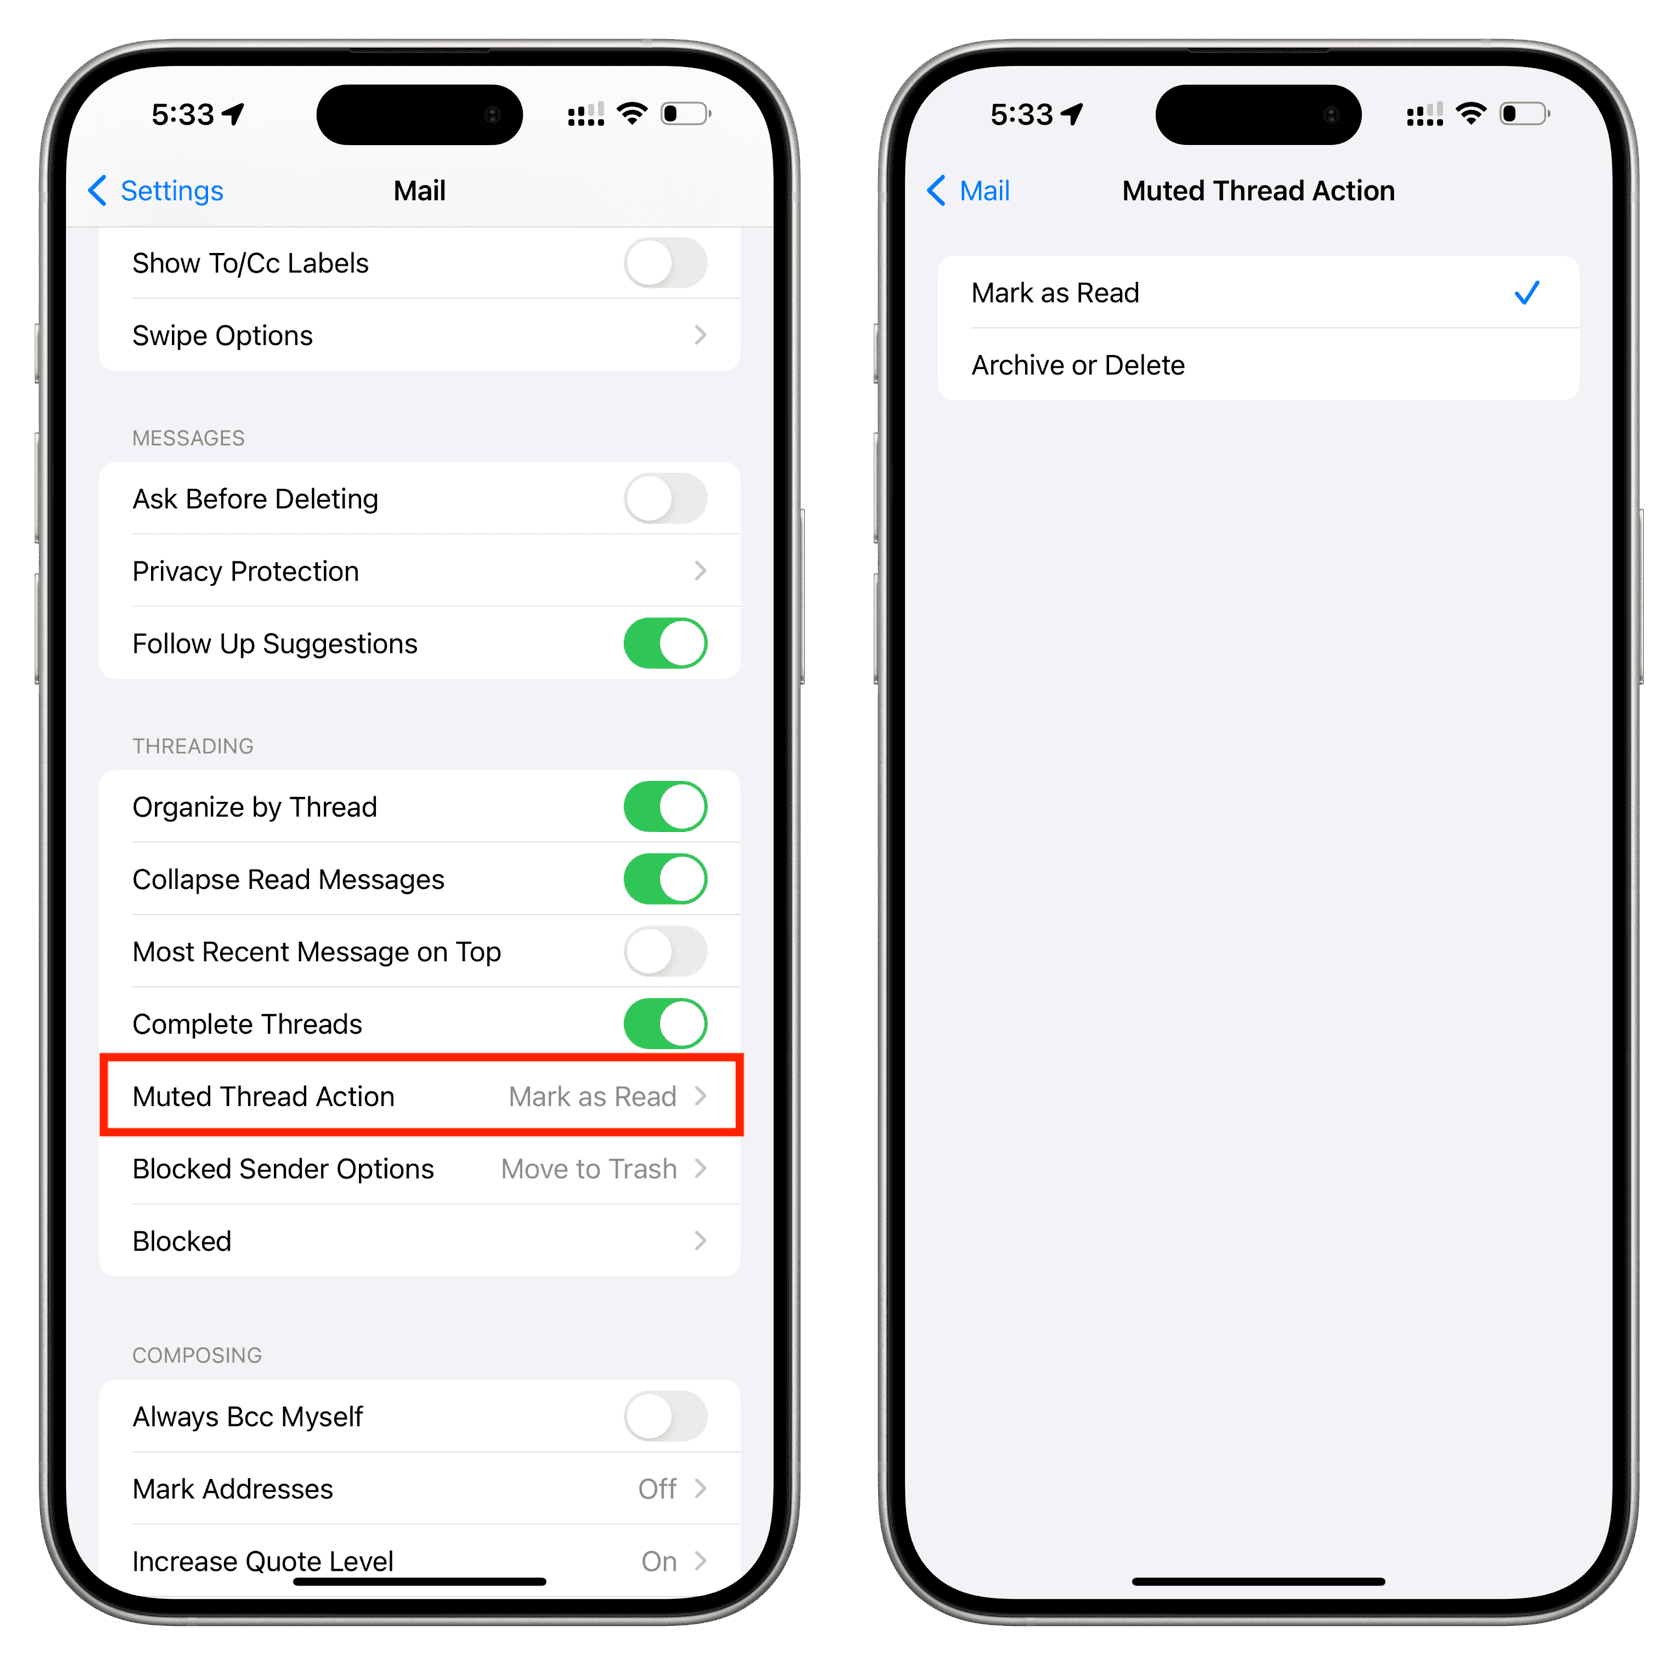 Muted Thread Action settings on iPhone